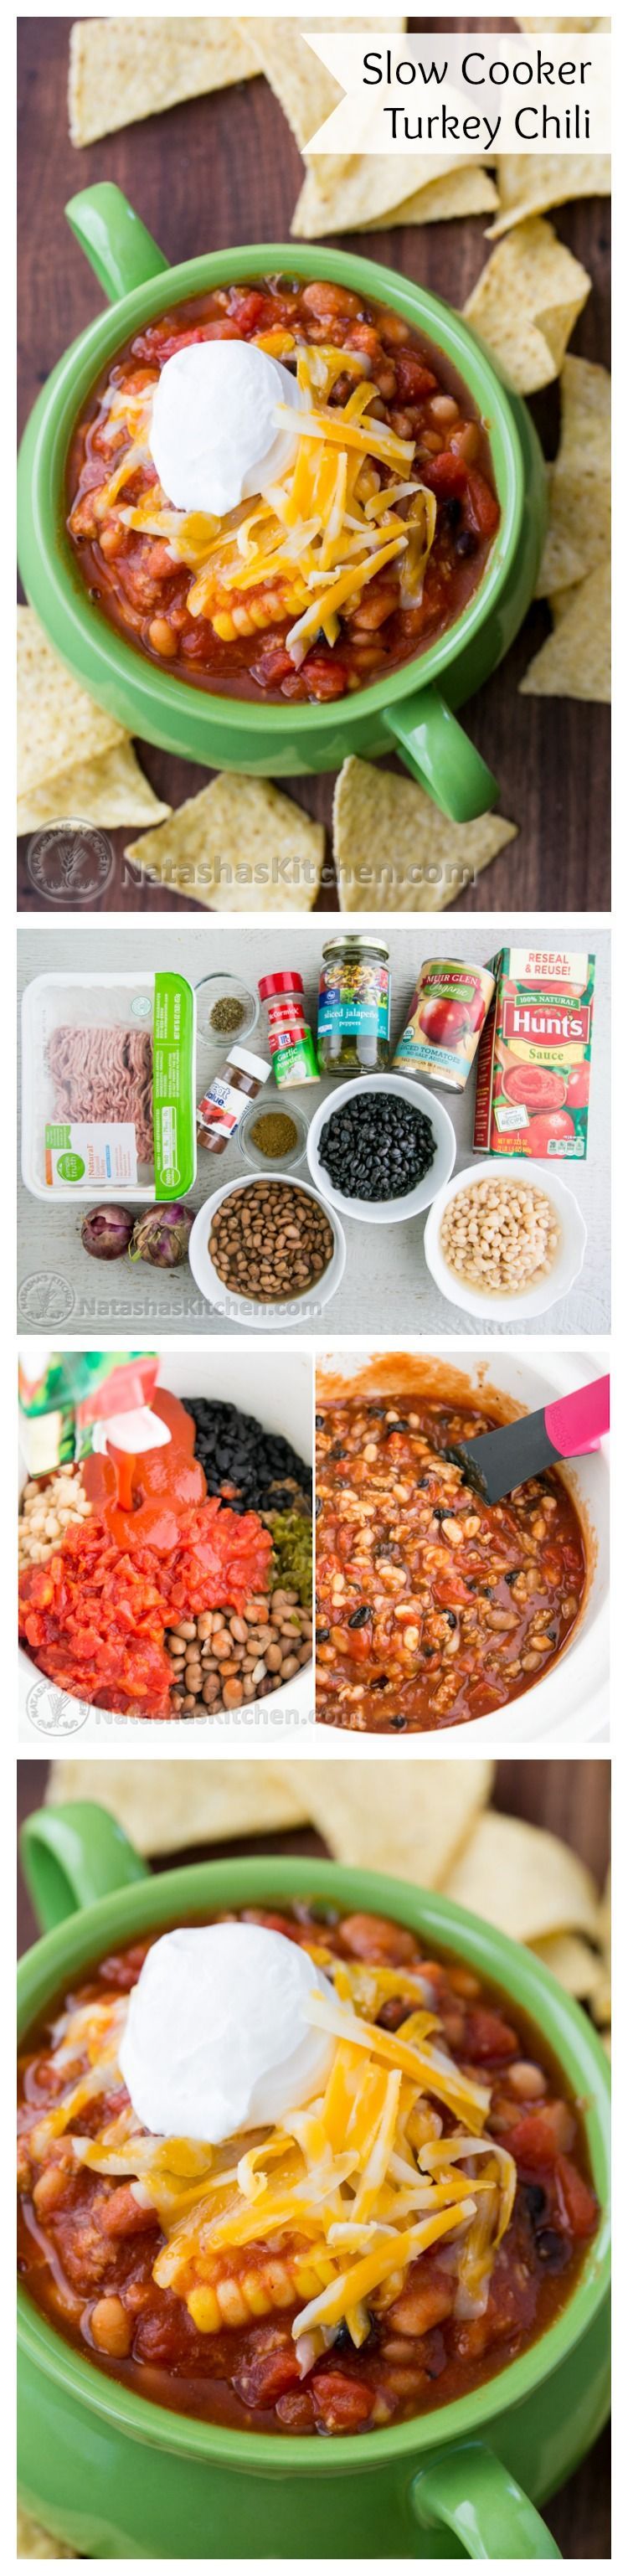 Slow Cooker Turkey Chili Re